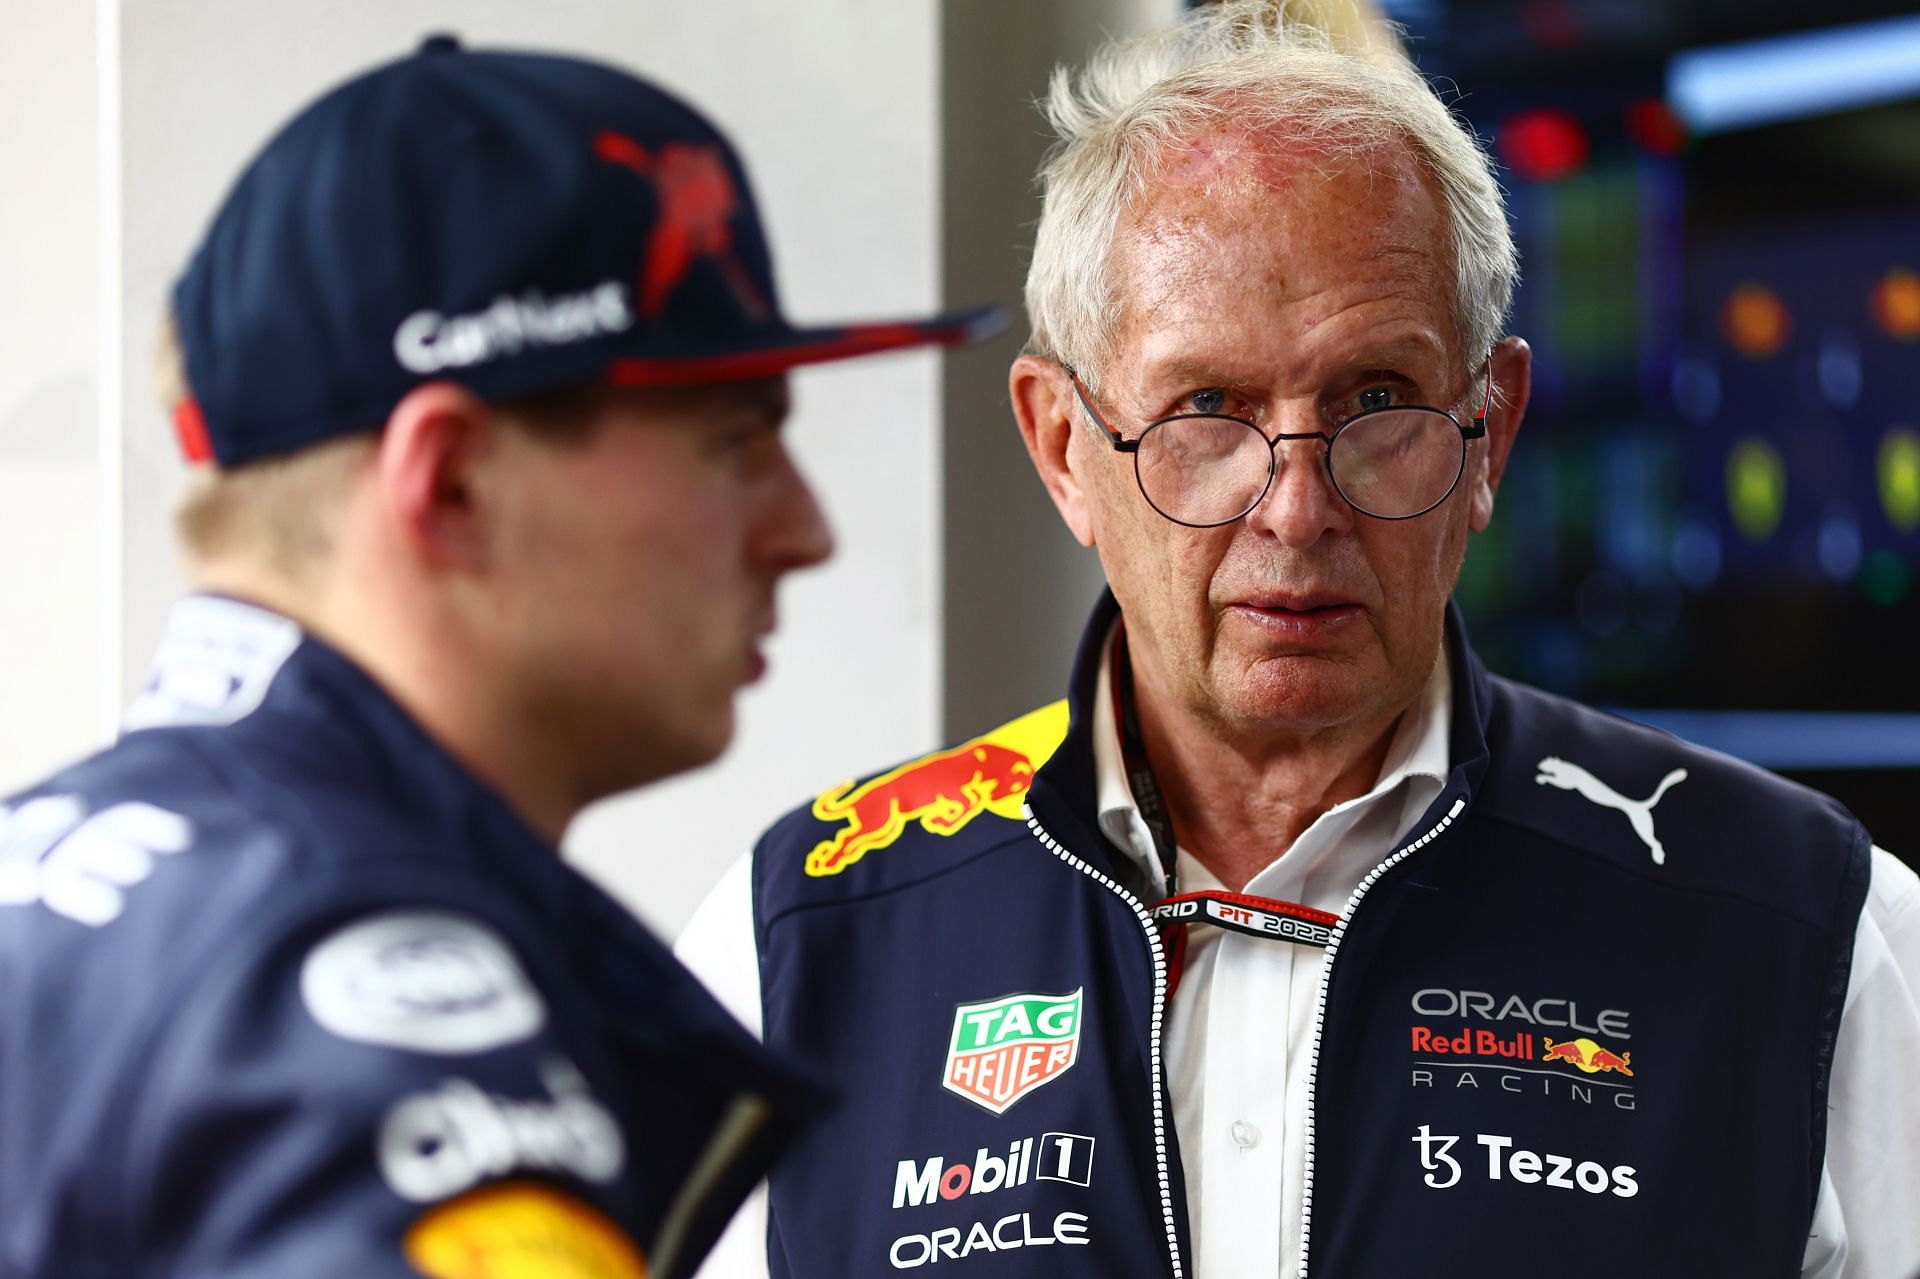 Red Bull Racing Team Consultant Dr Helmut Marko during qualifying ahead of the F1 Grand Prix of Saudi Arabia at the Jeddah Corniche Circuit on March 26, 2022, in Jeddah, Saudi Arabia (Photo by Mark Thompson/Getty Images)